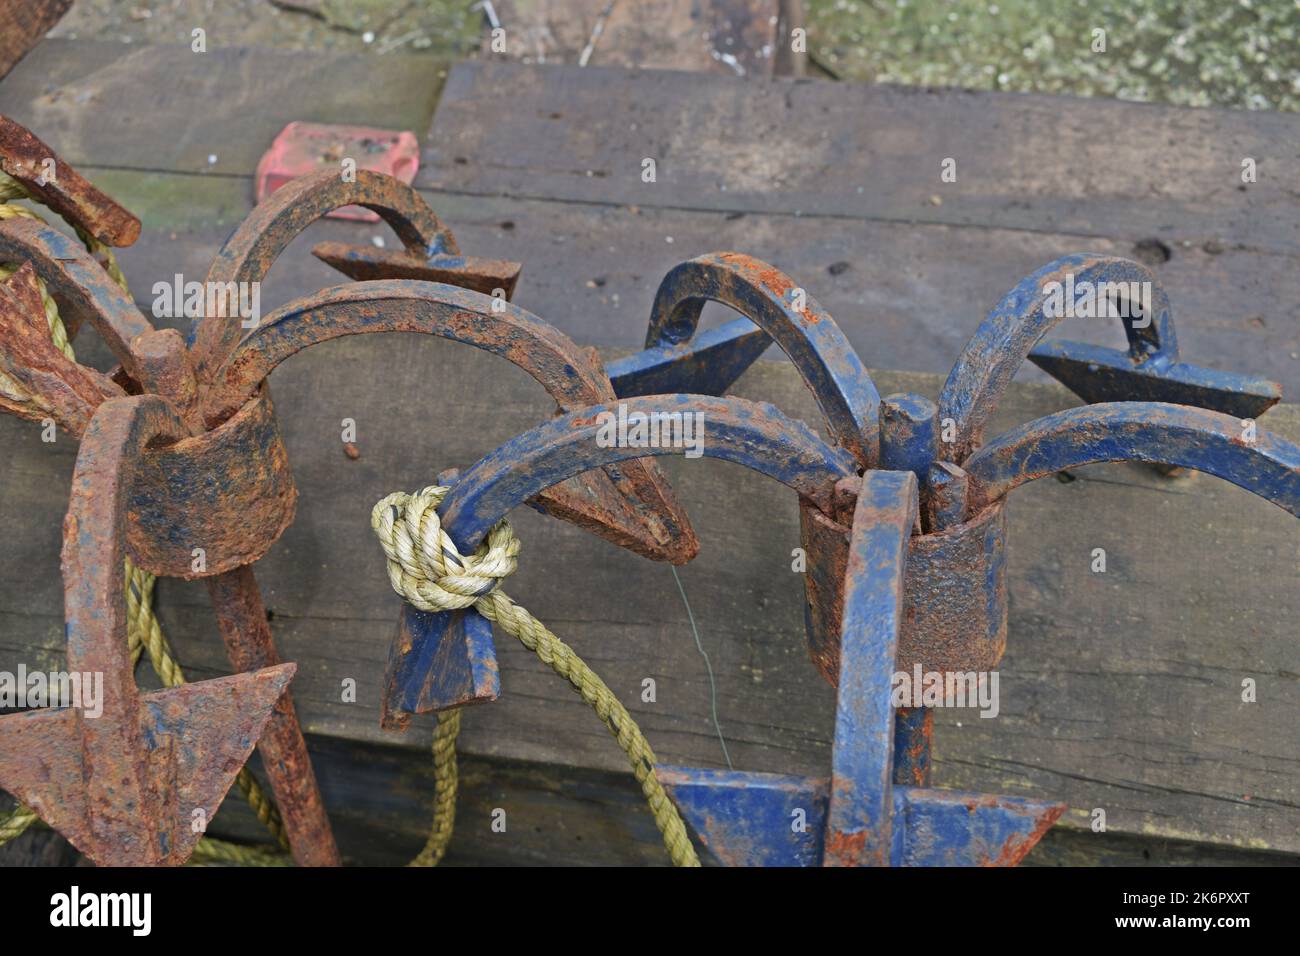 Rusty Anchors and Maritime Equipment on a Wooden Dock at Daytime Stock Photo